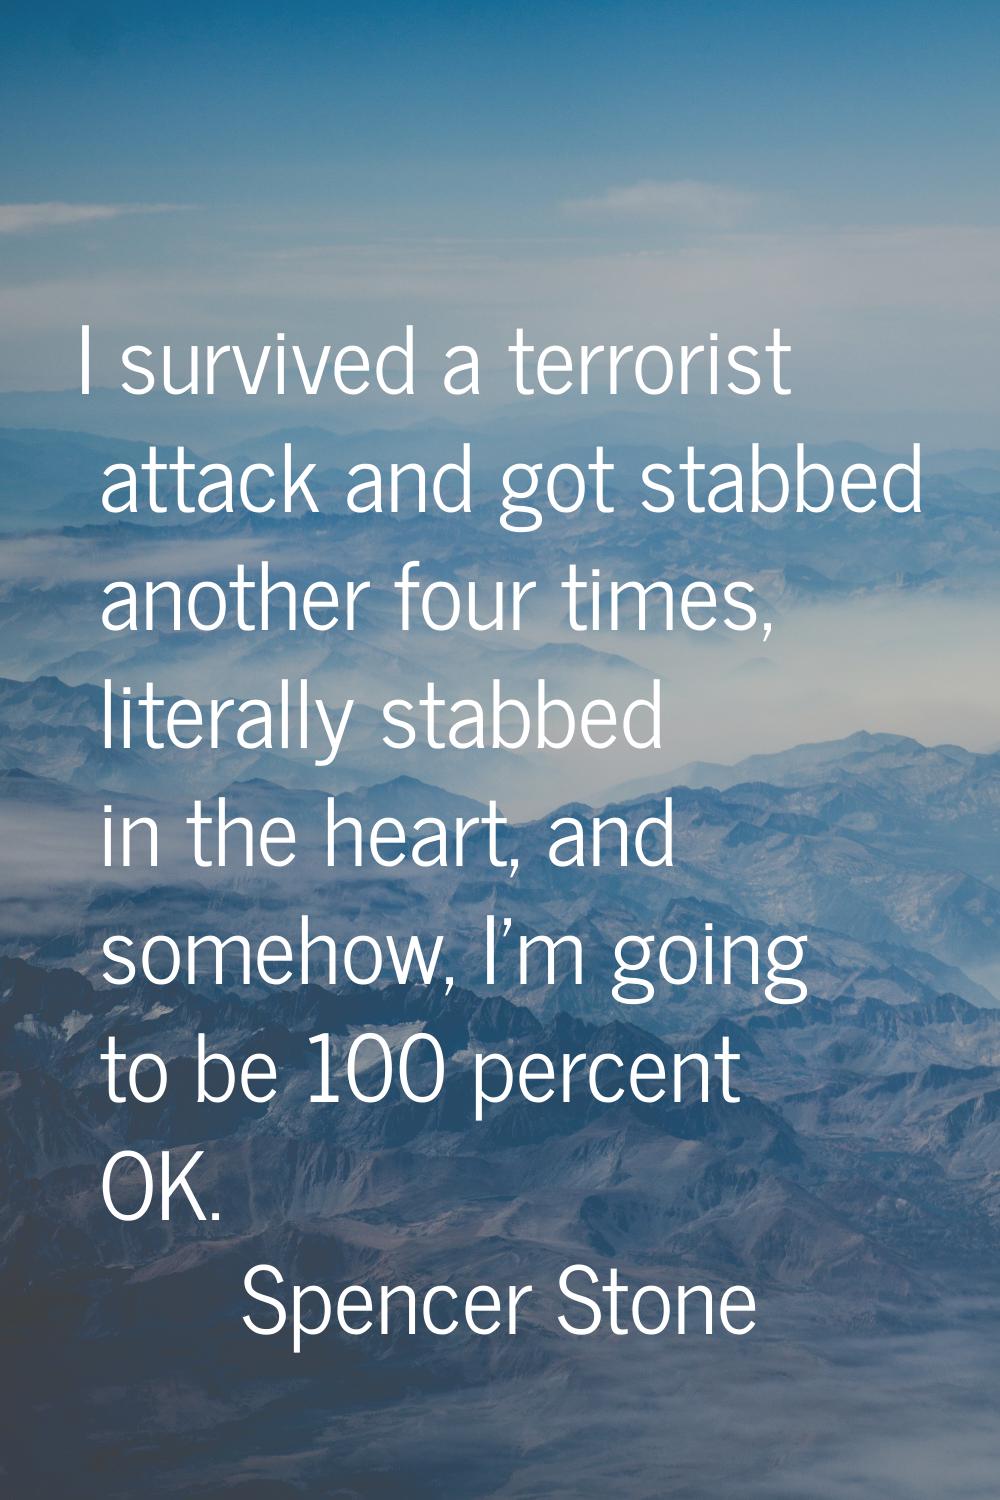 I survived a terrorist attack and got stabbed another four times, literally stabbed in the heart, a